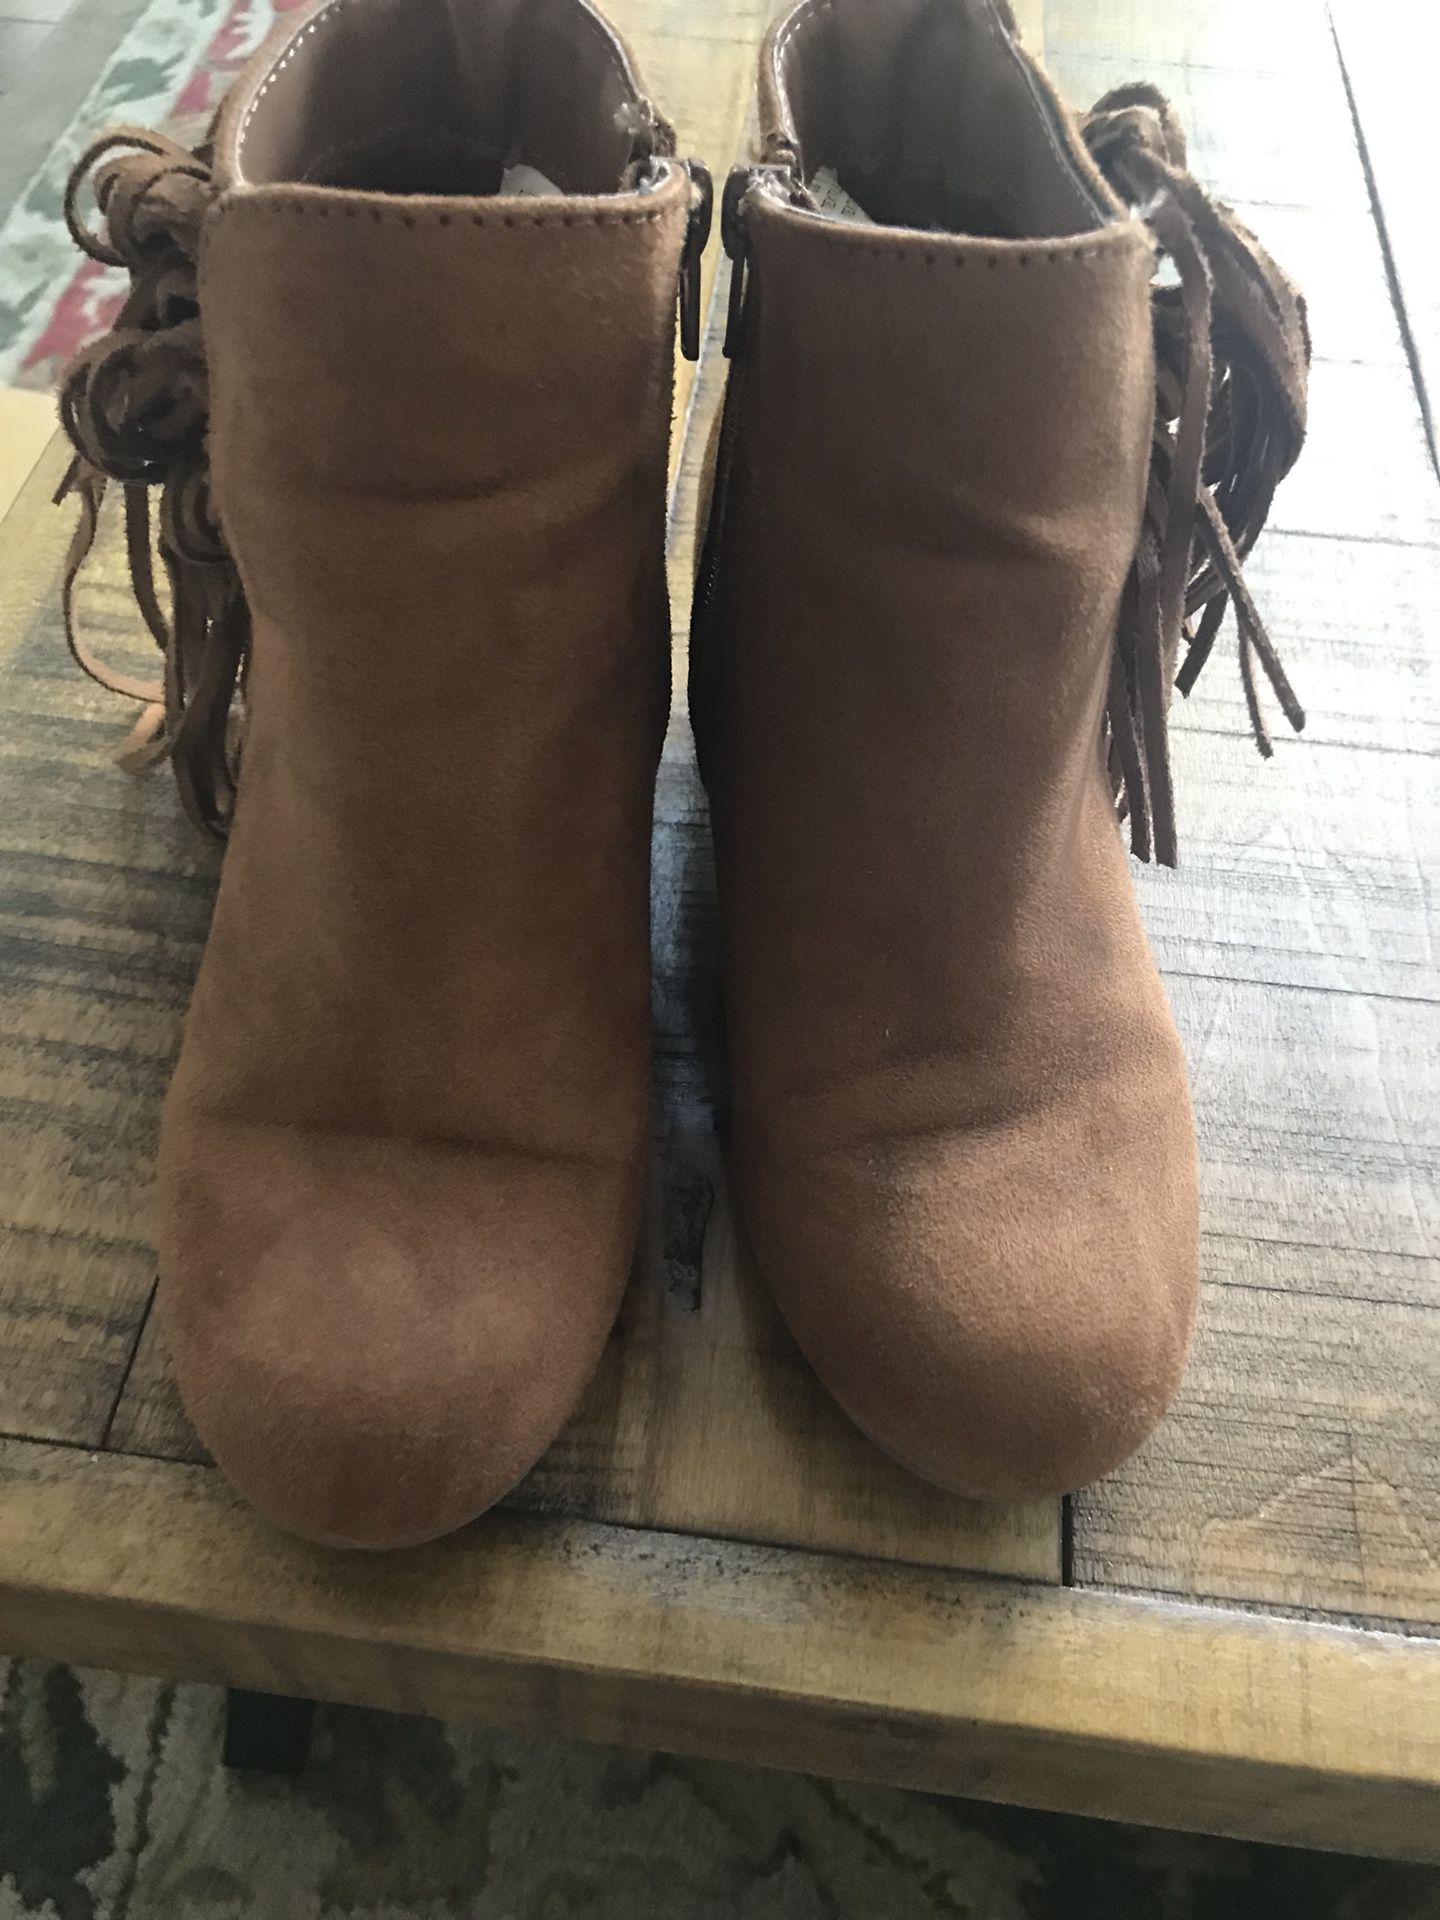 Girl’s boots size 1